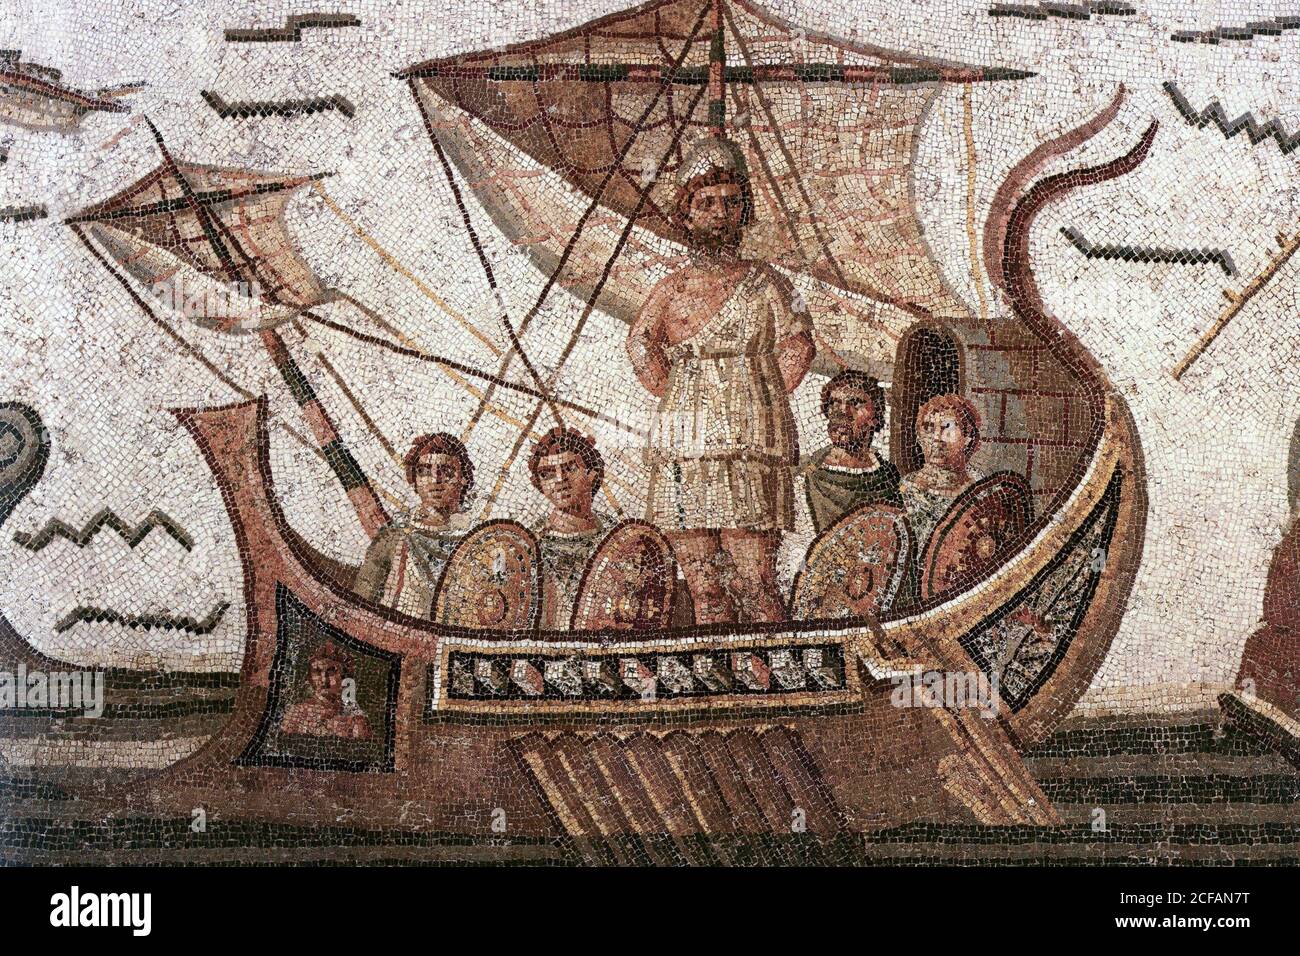 Odysseus and the Sirens. Stock Photo